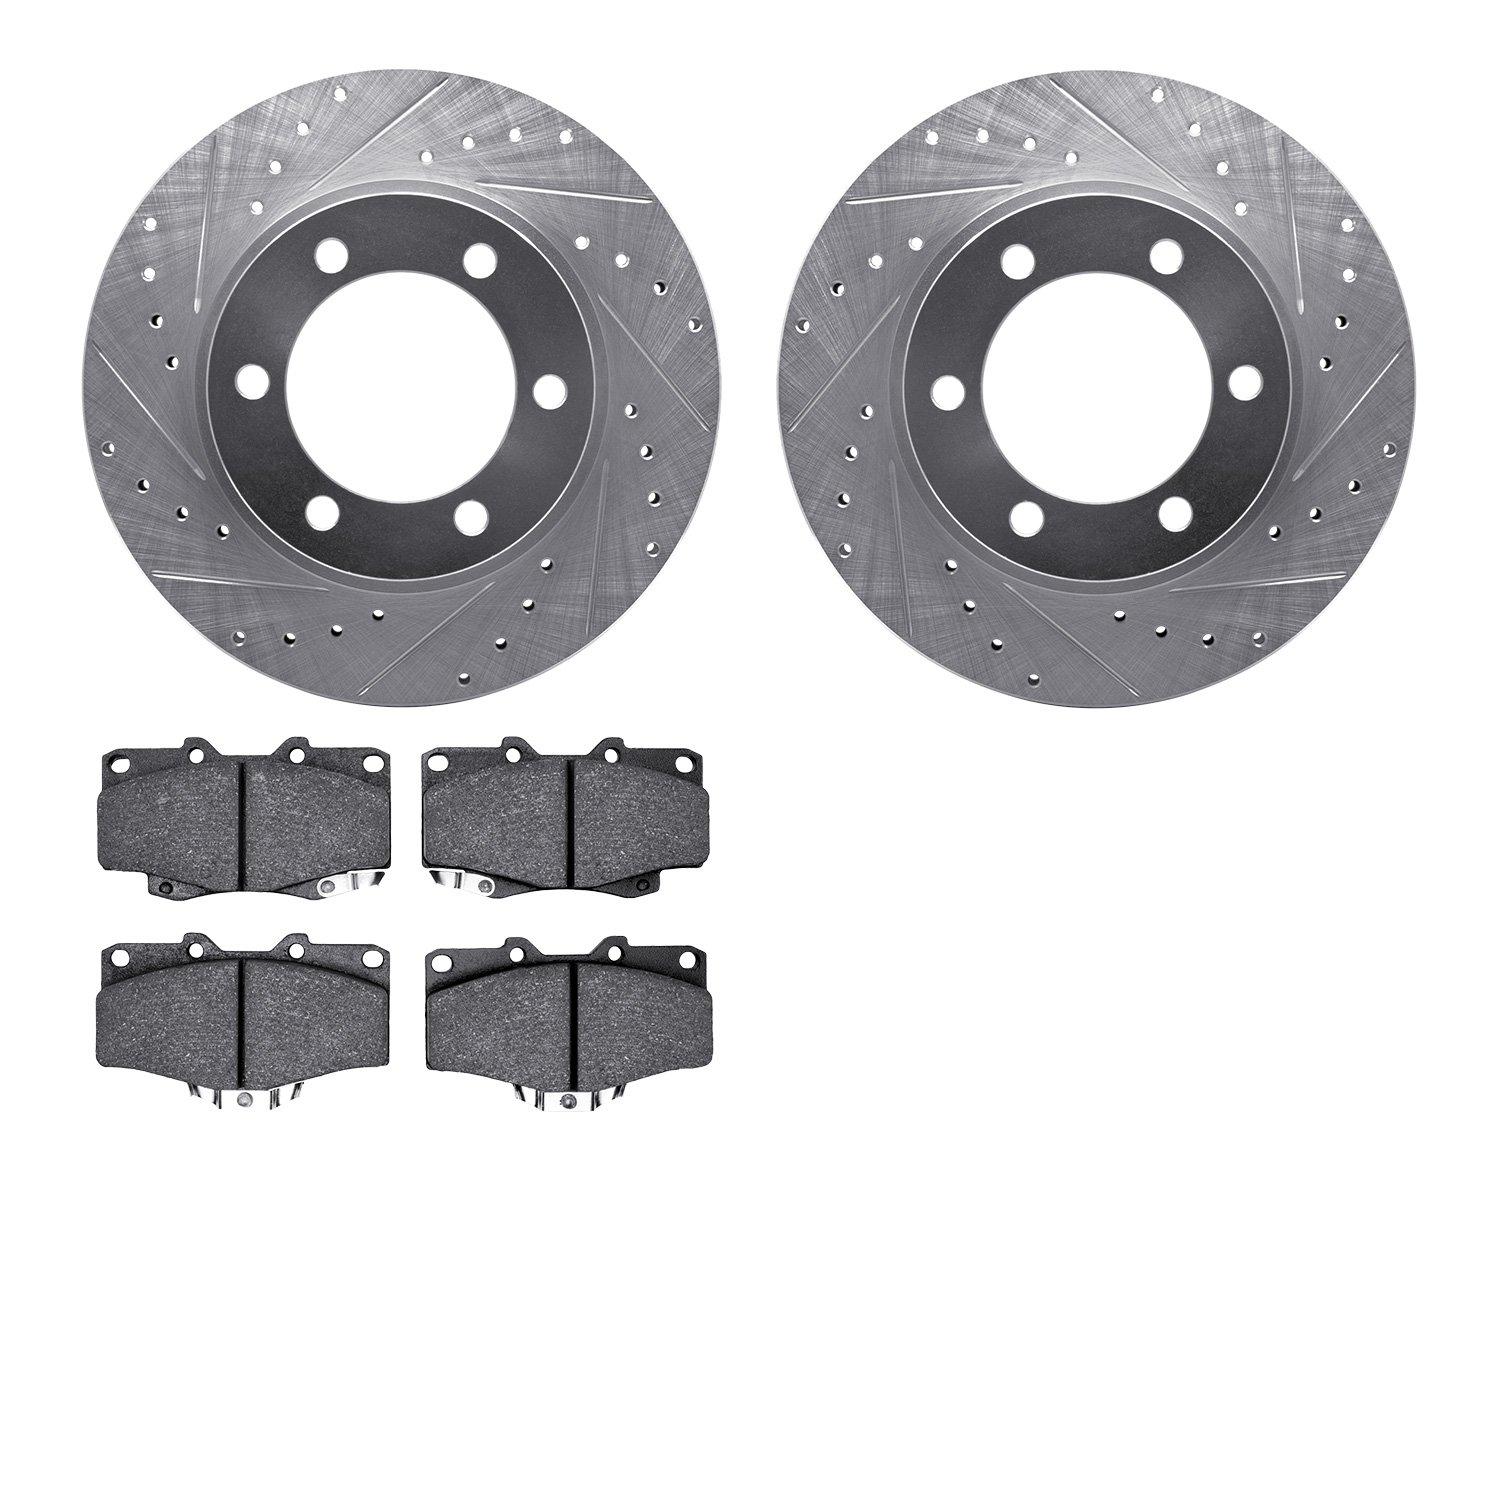 7402-76013 Drilled/Slotted Brake Rotors with Ultimate-Duty Brake Pads Kit [Silver], 1995-2004 Lexus/Toyota/Scion, Position: Fron